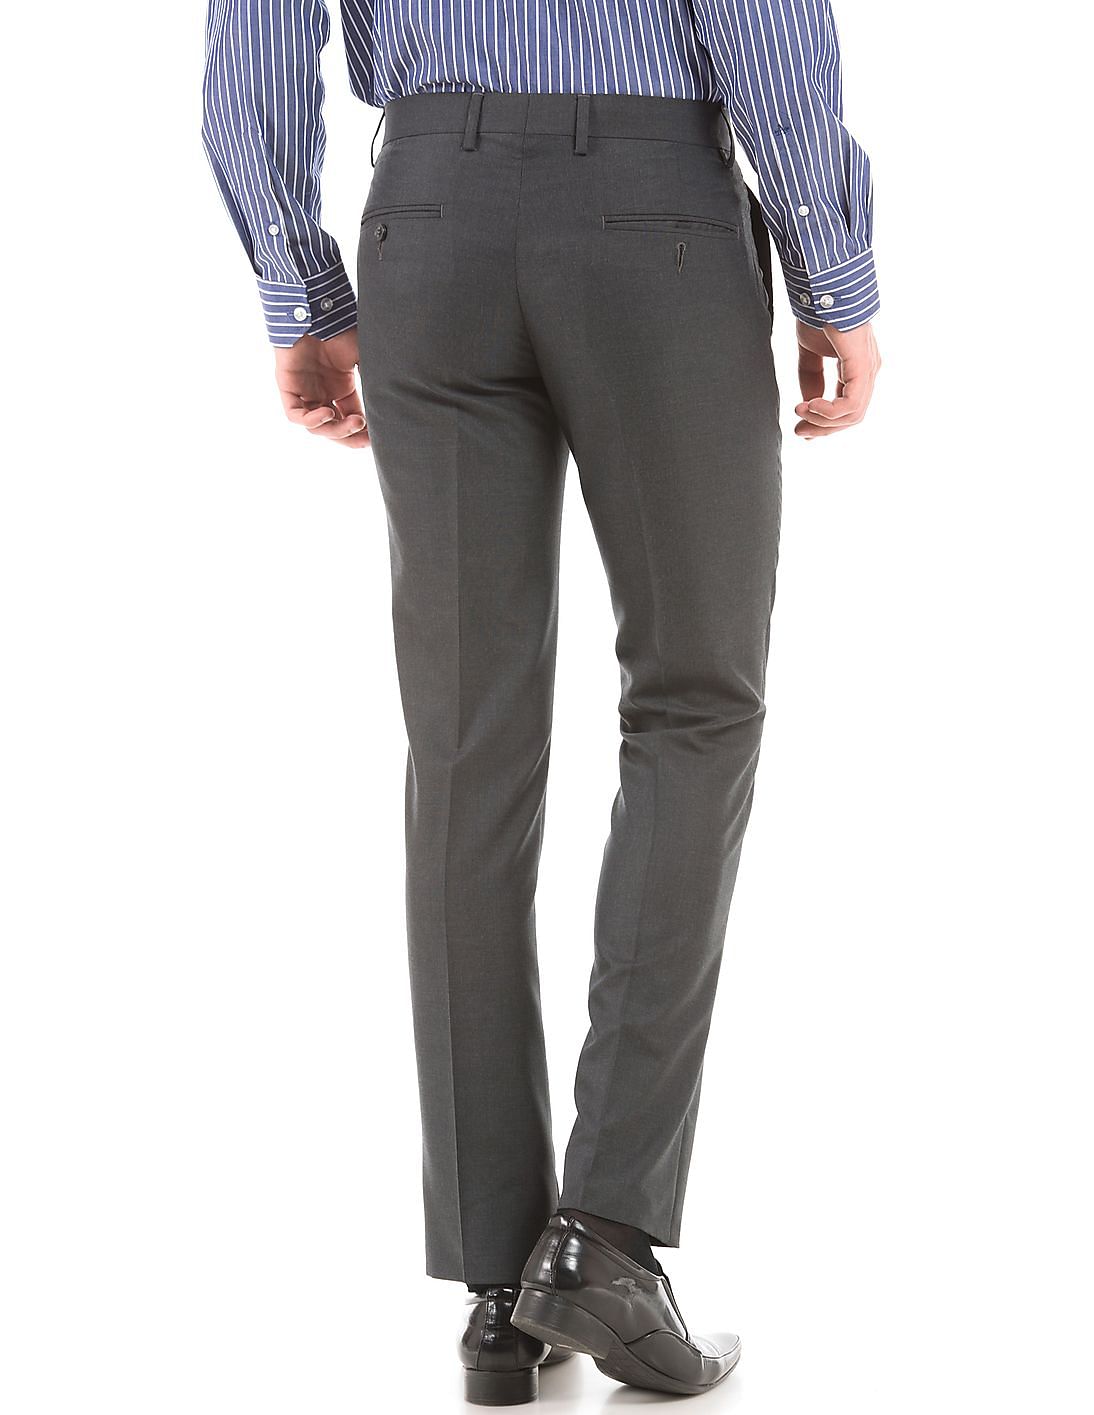 Essentials Men’s Slim-Fit Wrinkle-Resistant Flat-Front Chino Trousers 